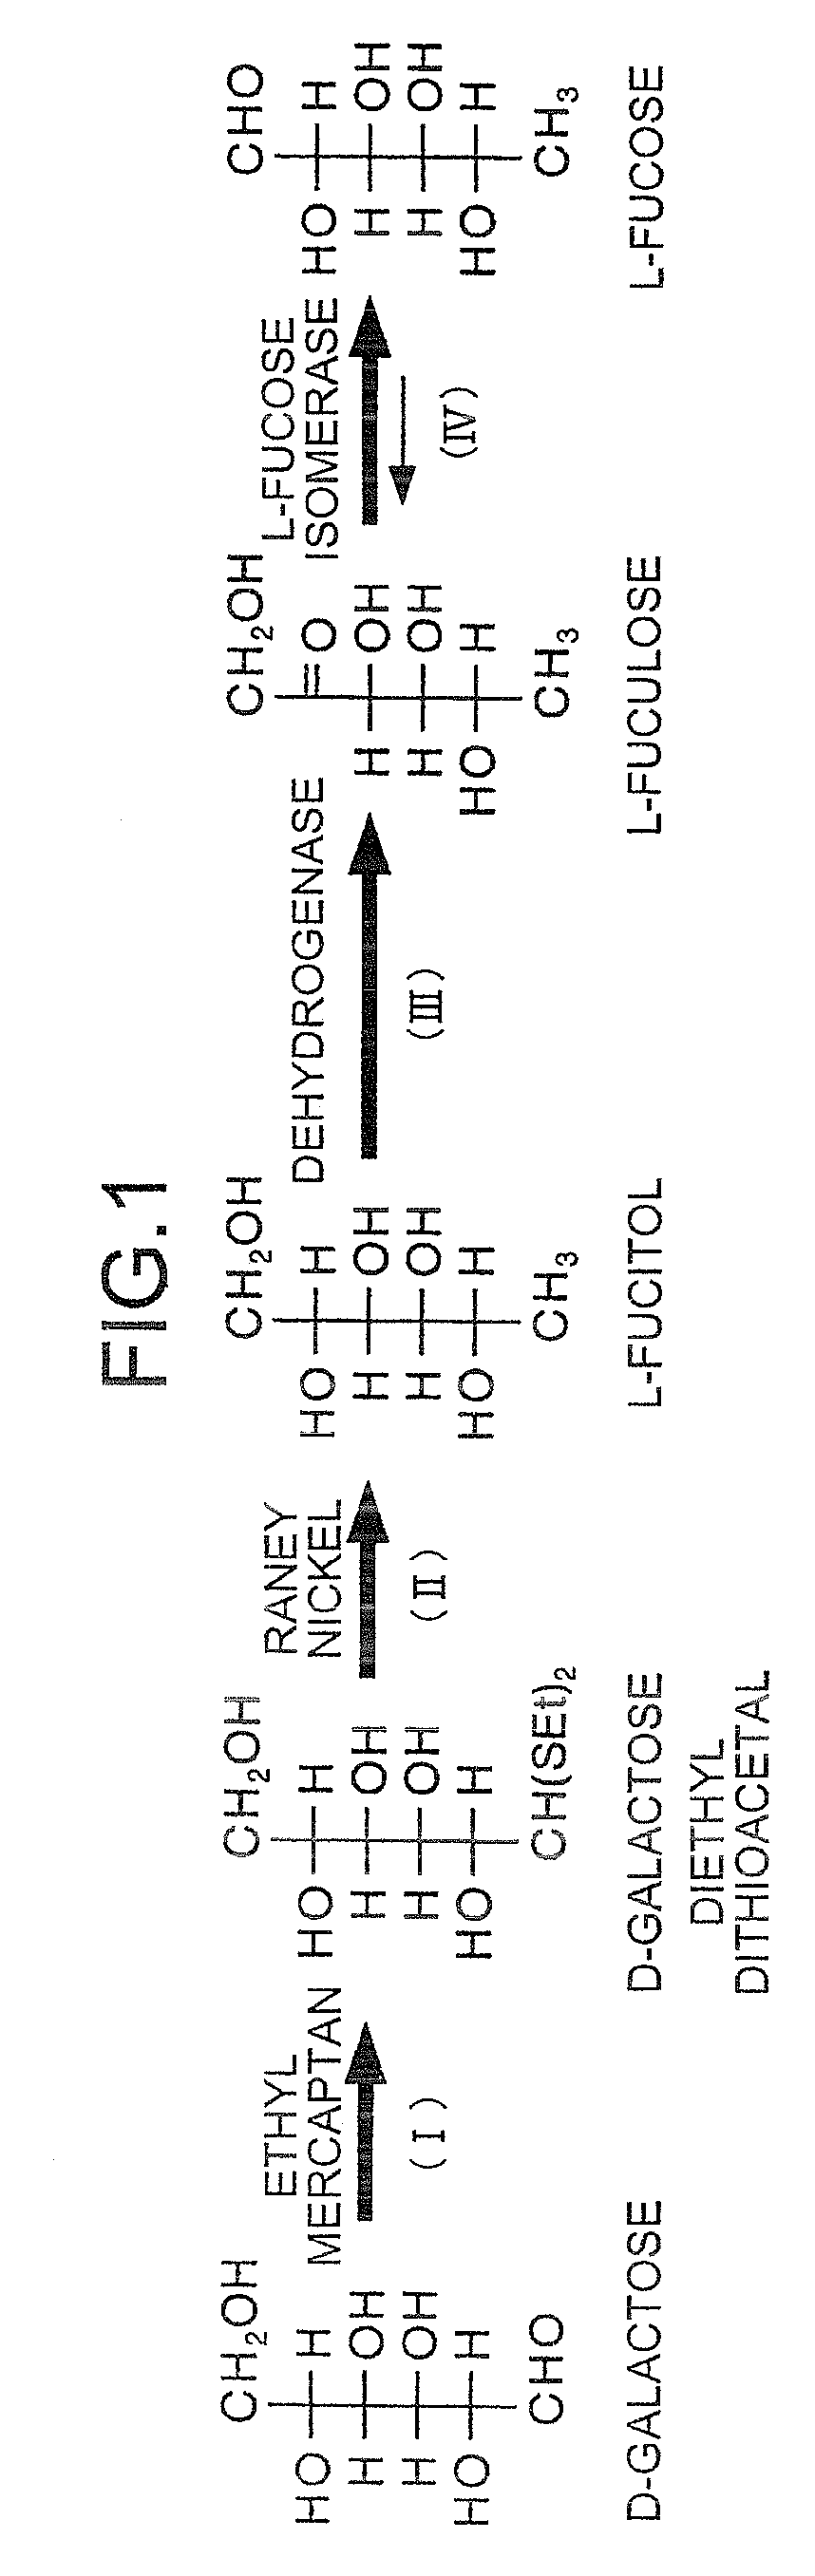 Method for producing L-fuculose and method for producing L-fucose